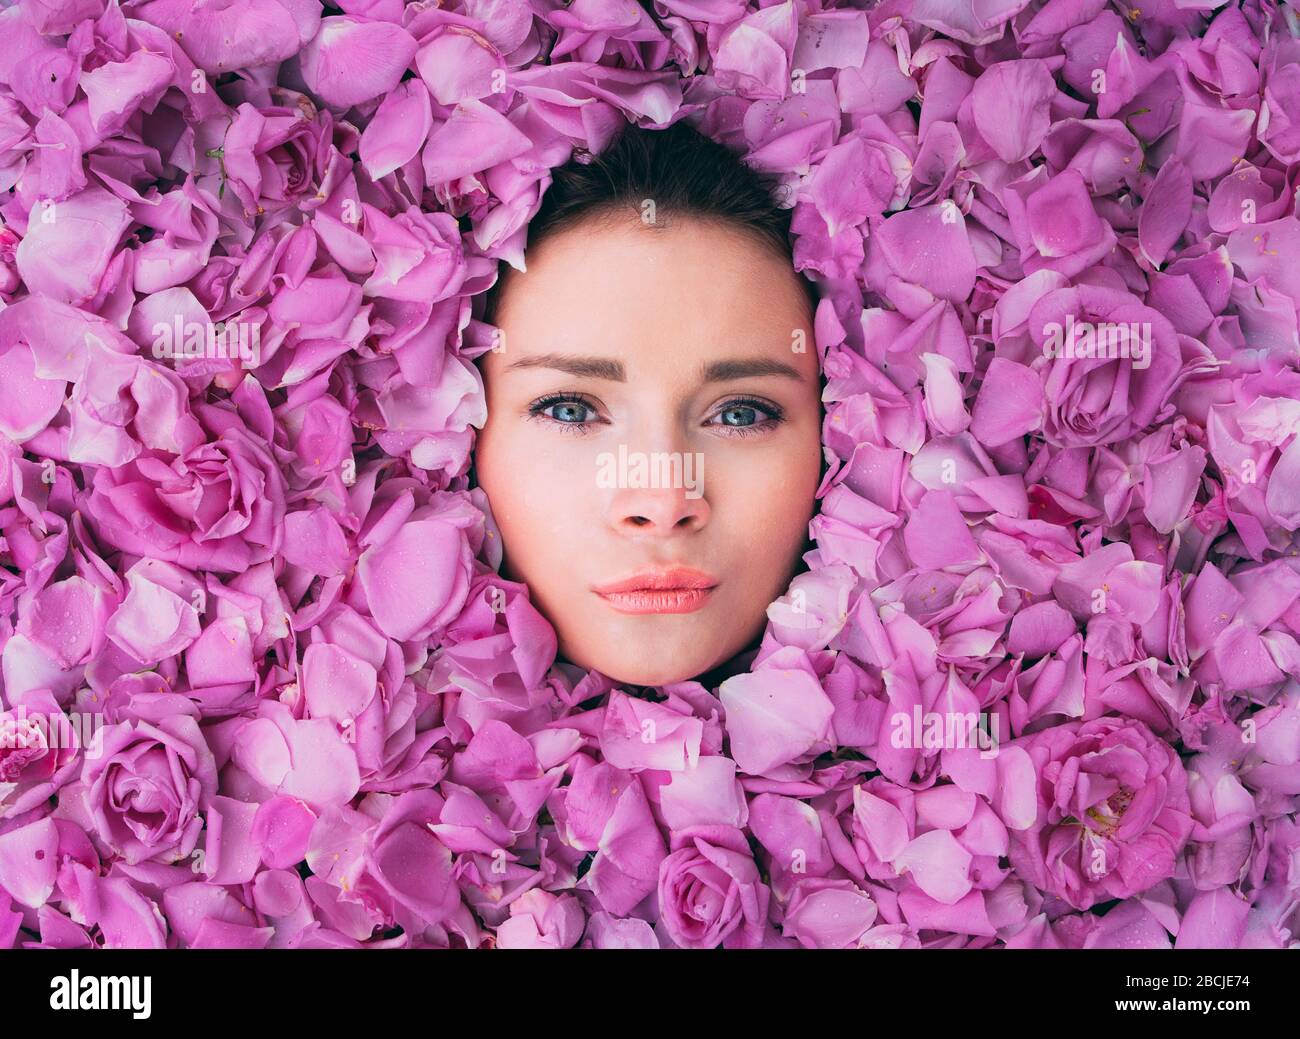 Portrait of beautiful young woman with pink lips and green eyes among the pink petals of rose Stock Photo